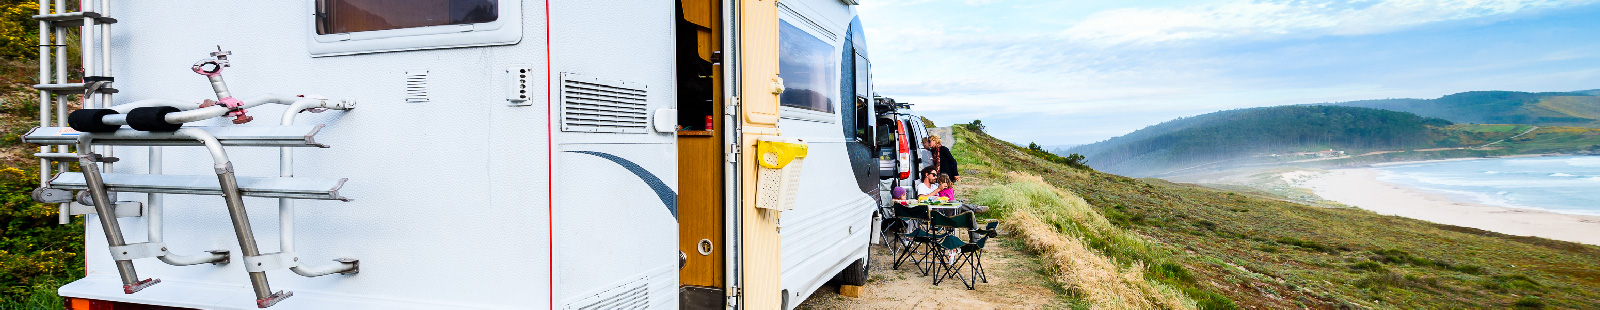 Image of an RV by the water